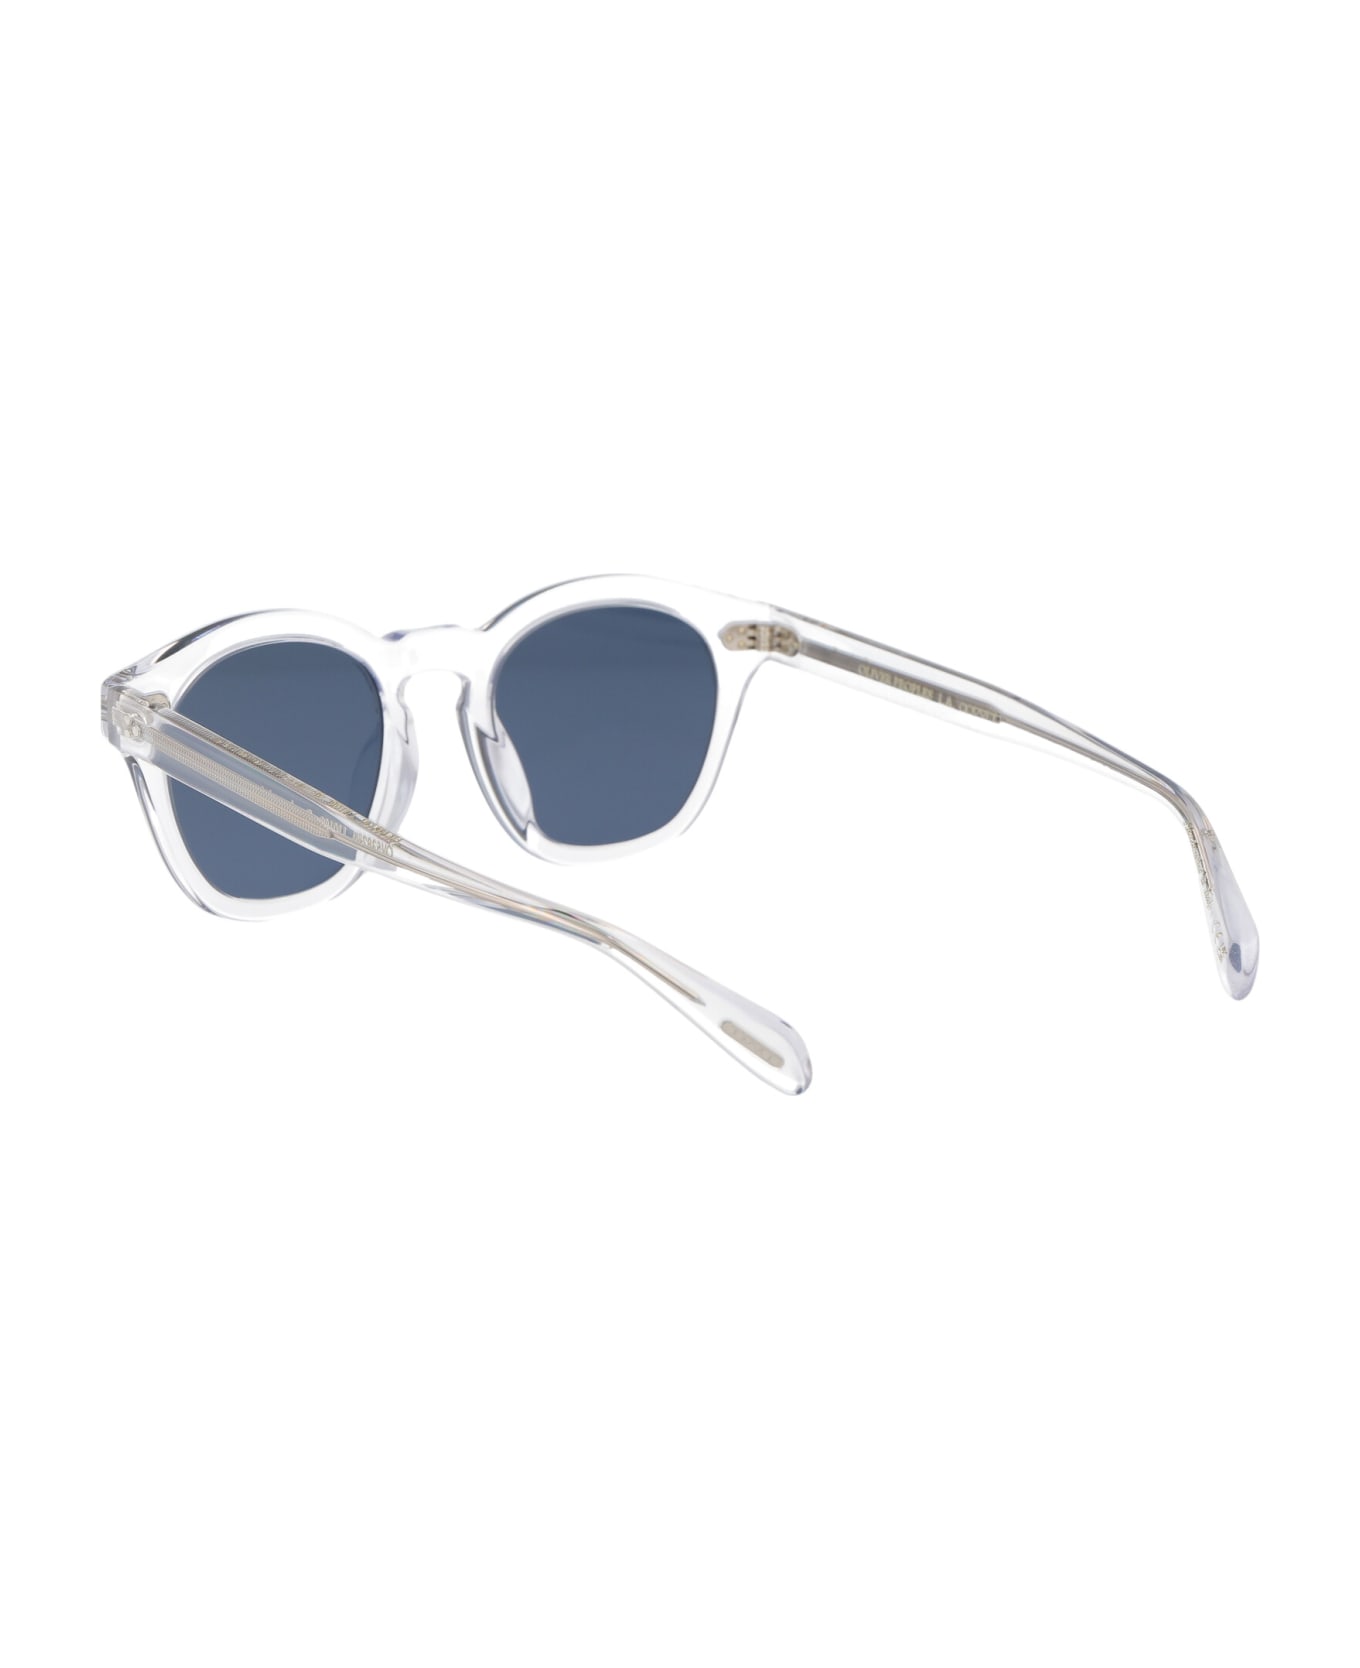 Oliver Peoples Boudreau L.a Sunglasses - 110180 Crystal サングラス